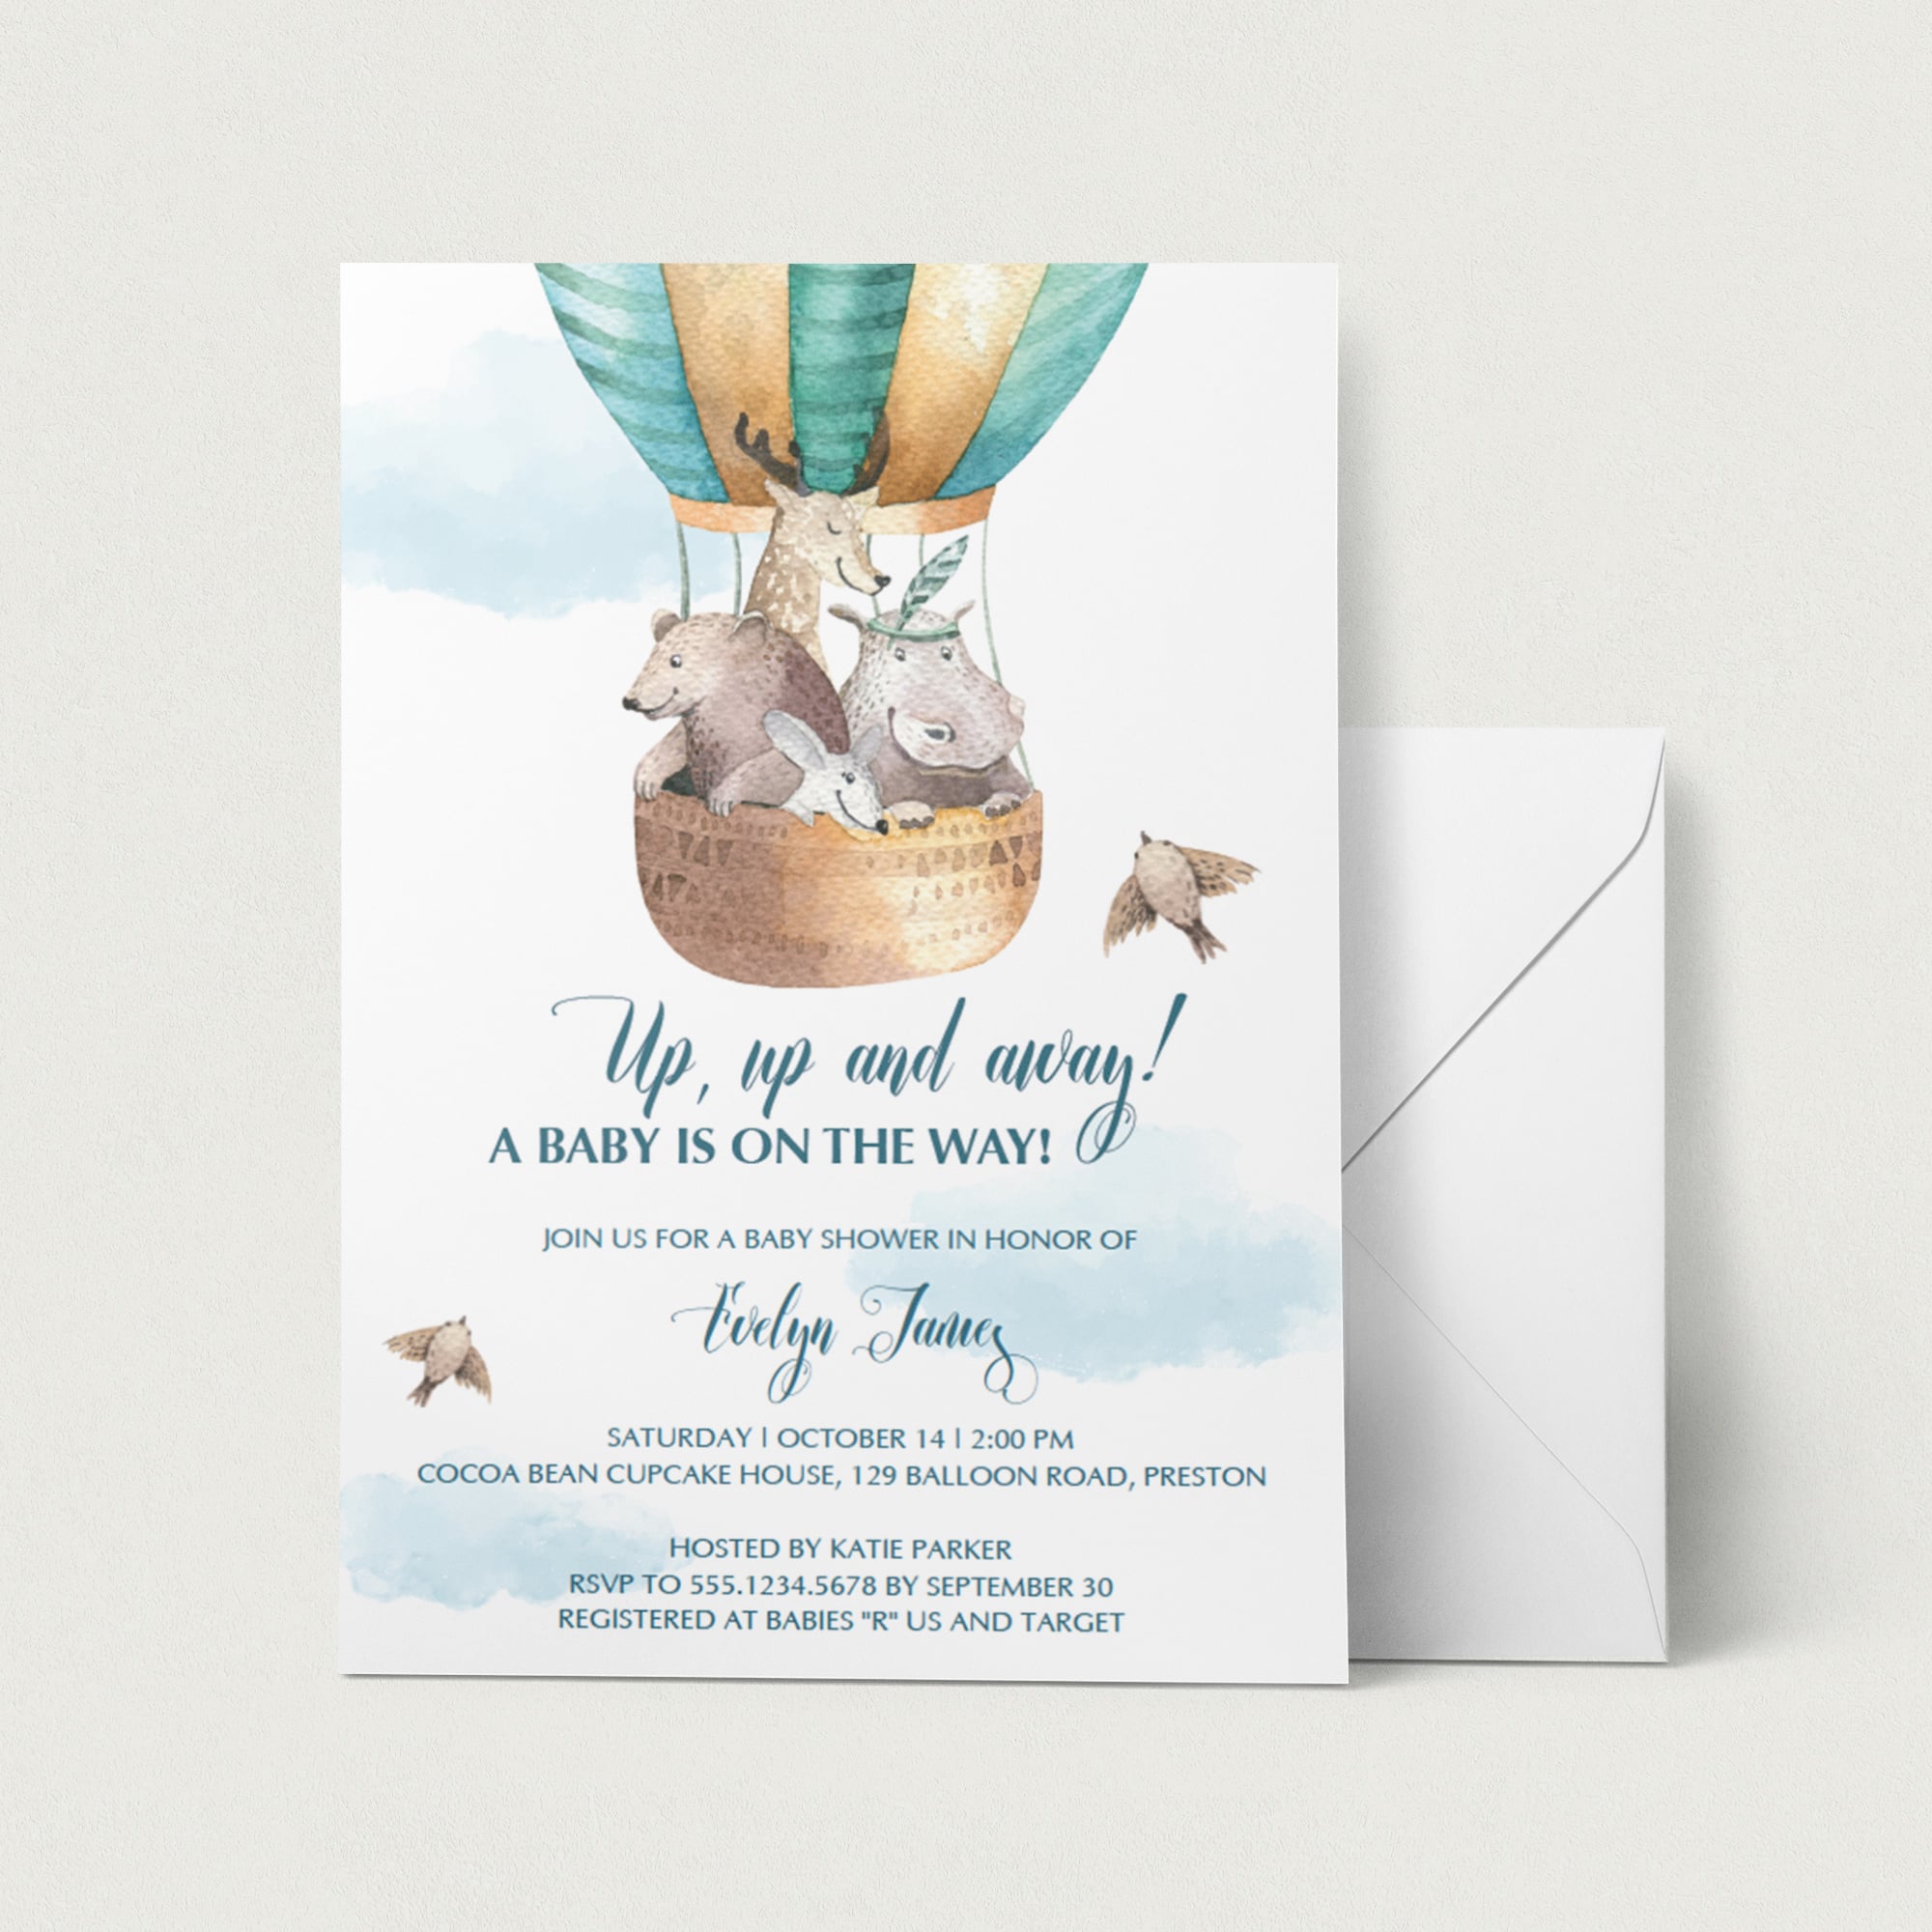 Hot air balloon baby shower invitations by LittleSizzle